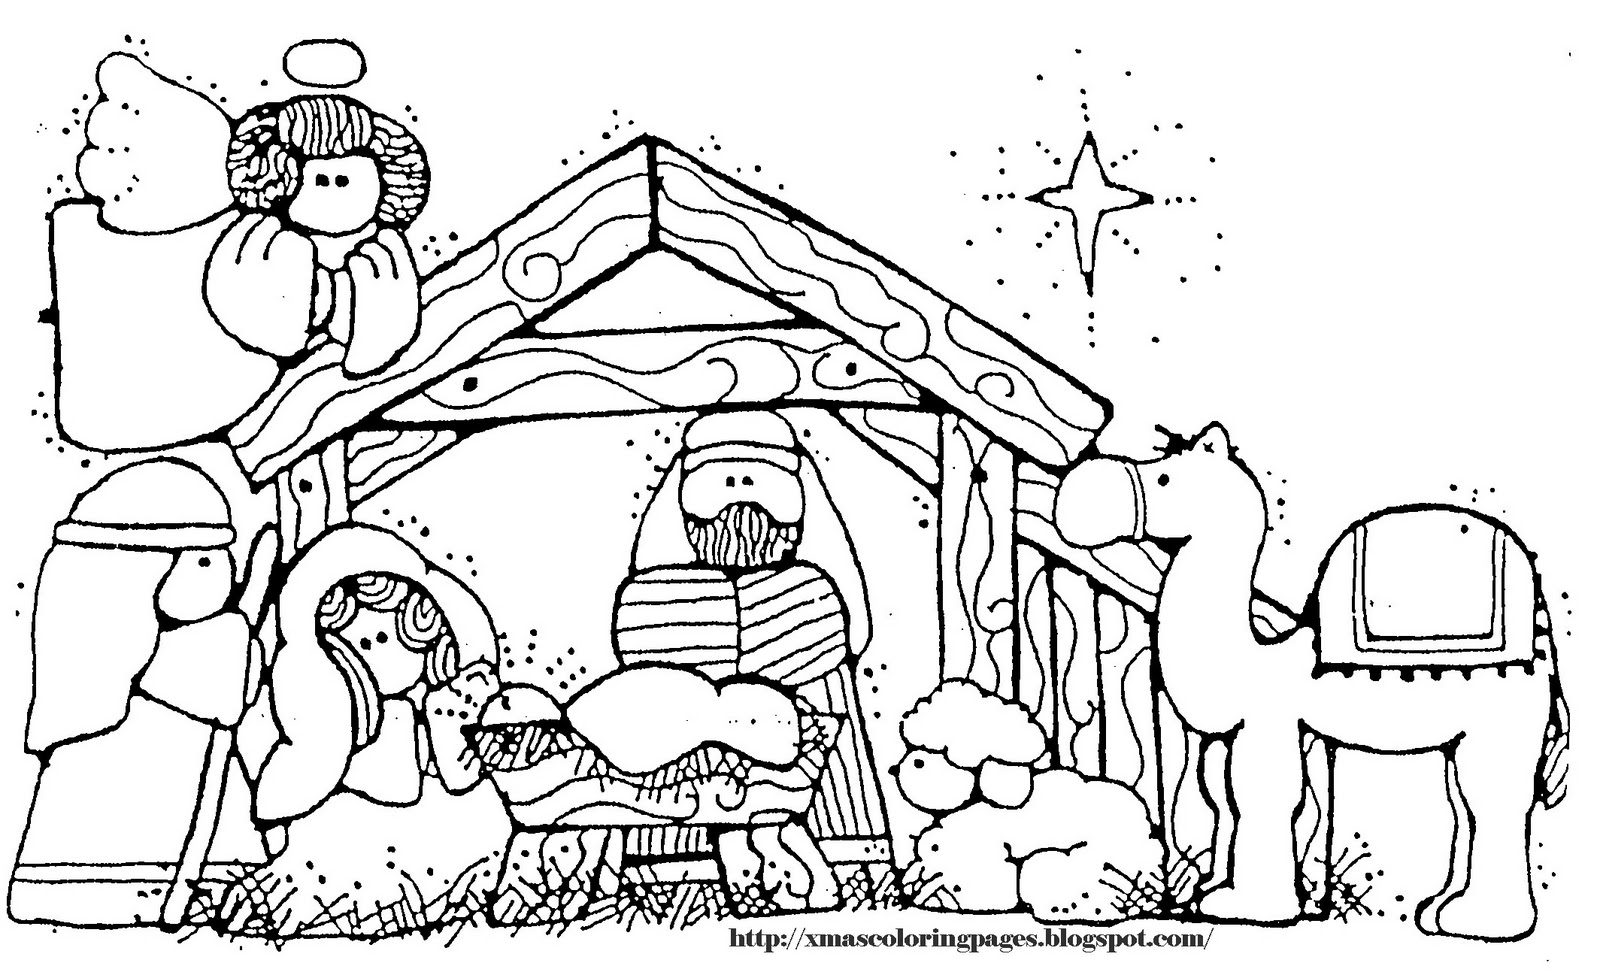 Away In A Manger Coloring Pages at GetColorings.com | Free printable